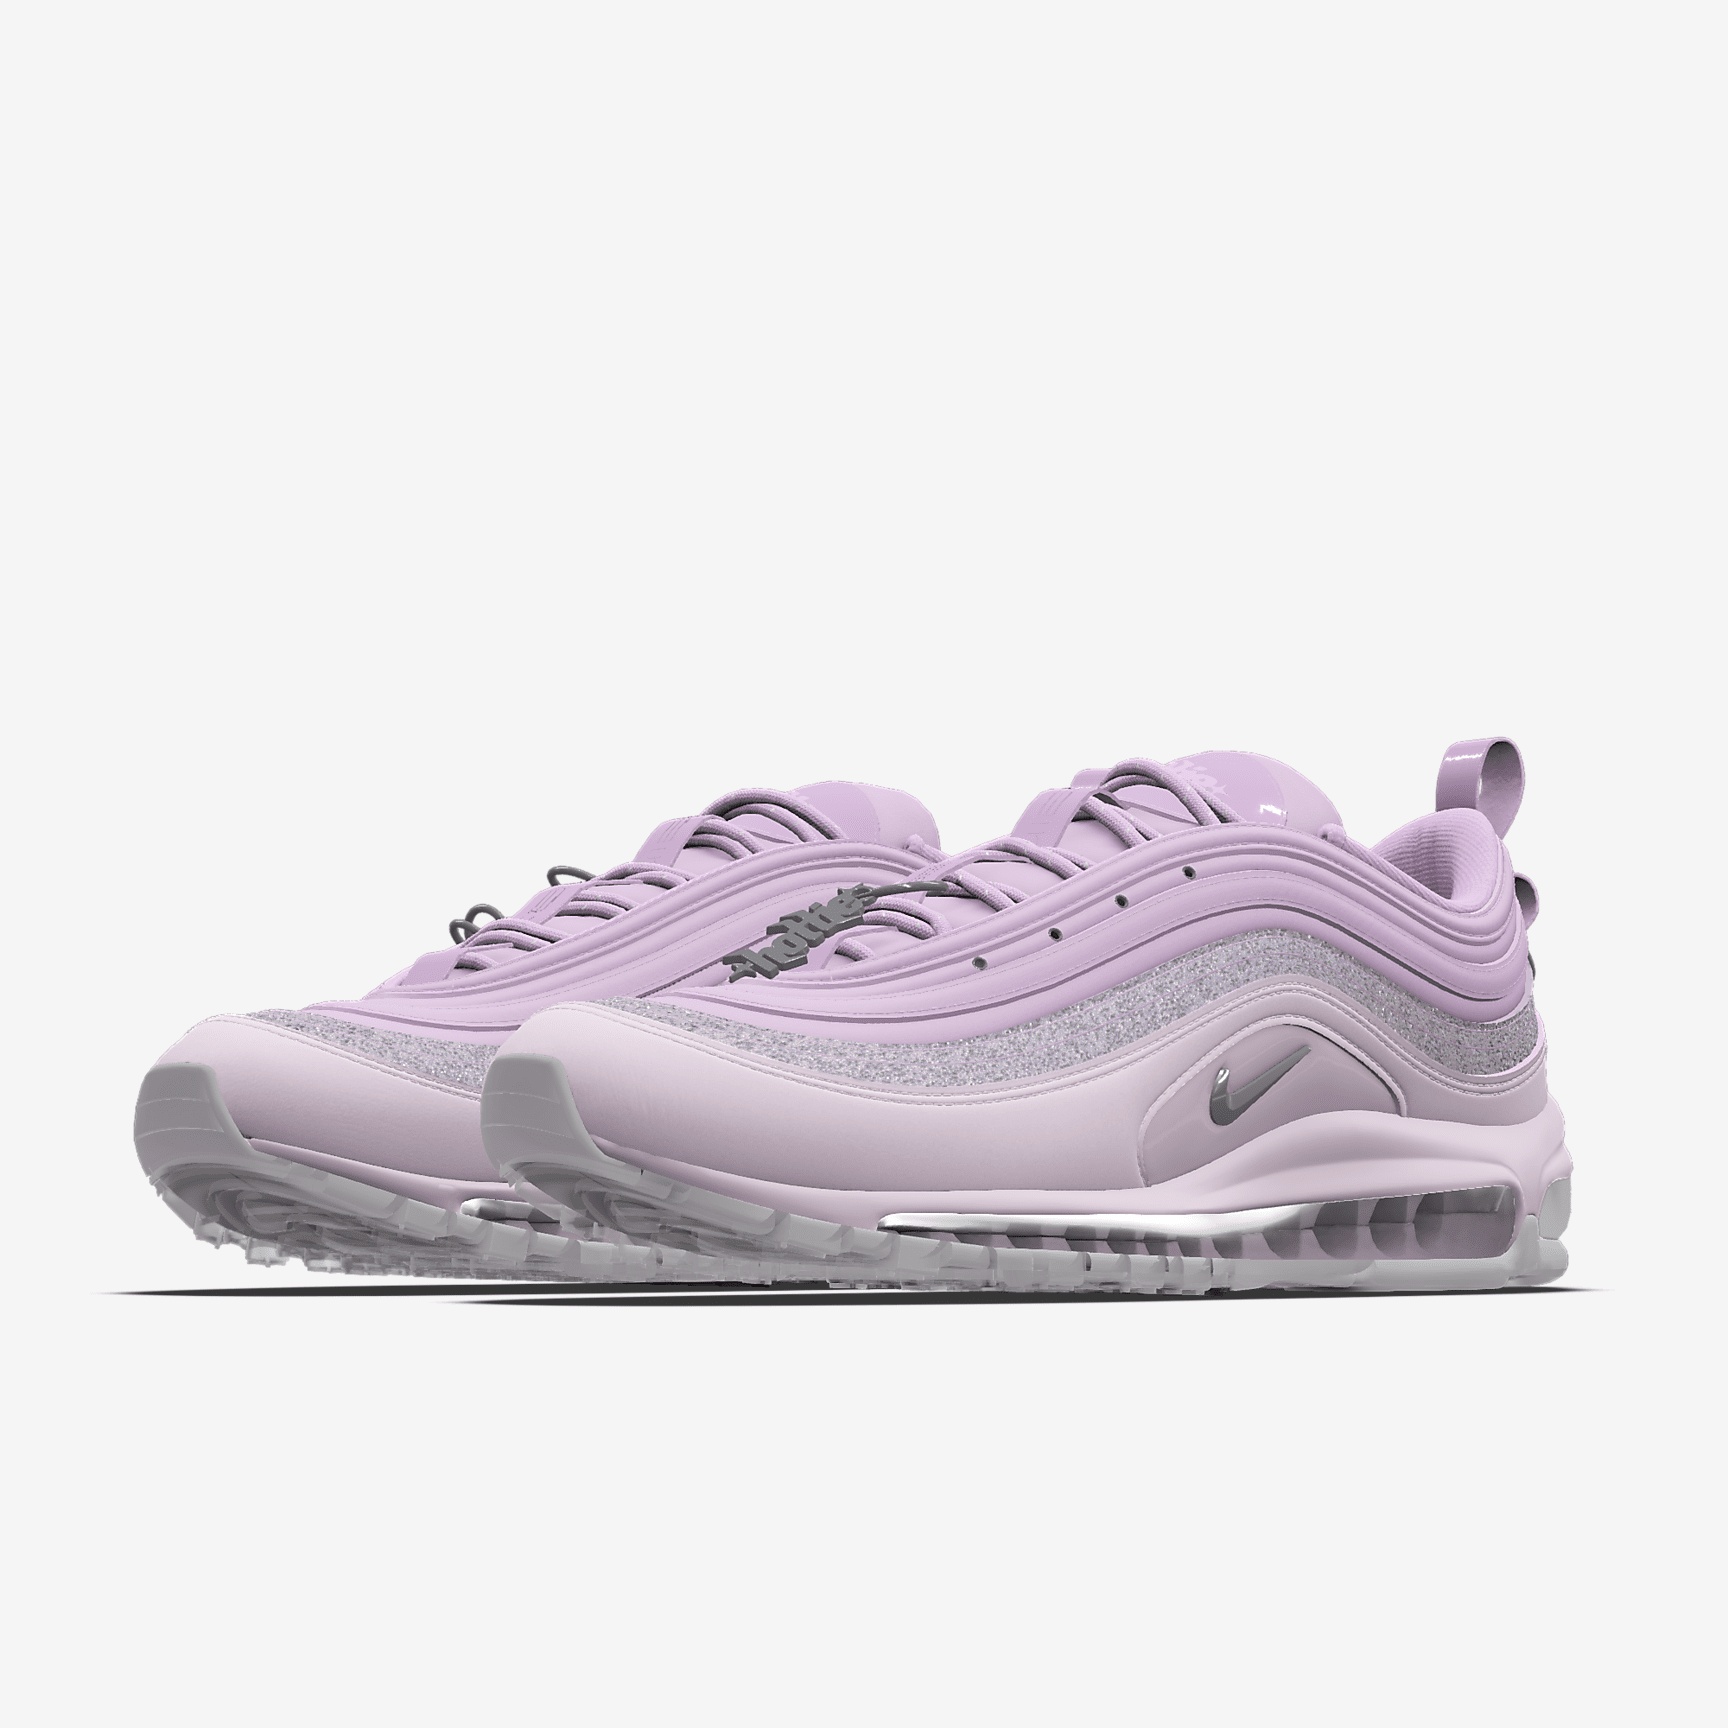 Nike Air Max 97 "Something For Thee Hotties" By You Custom Shoes - 2